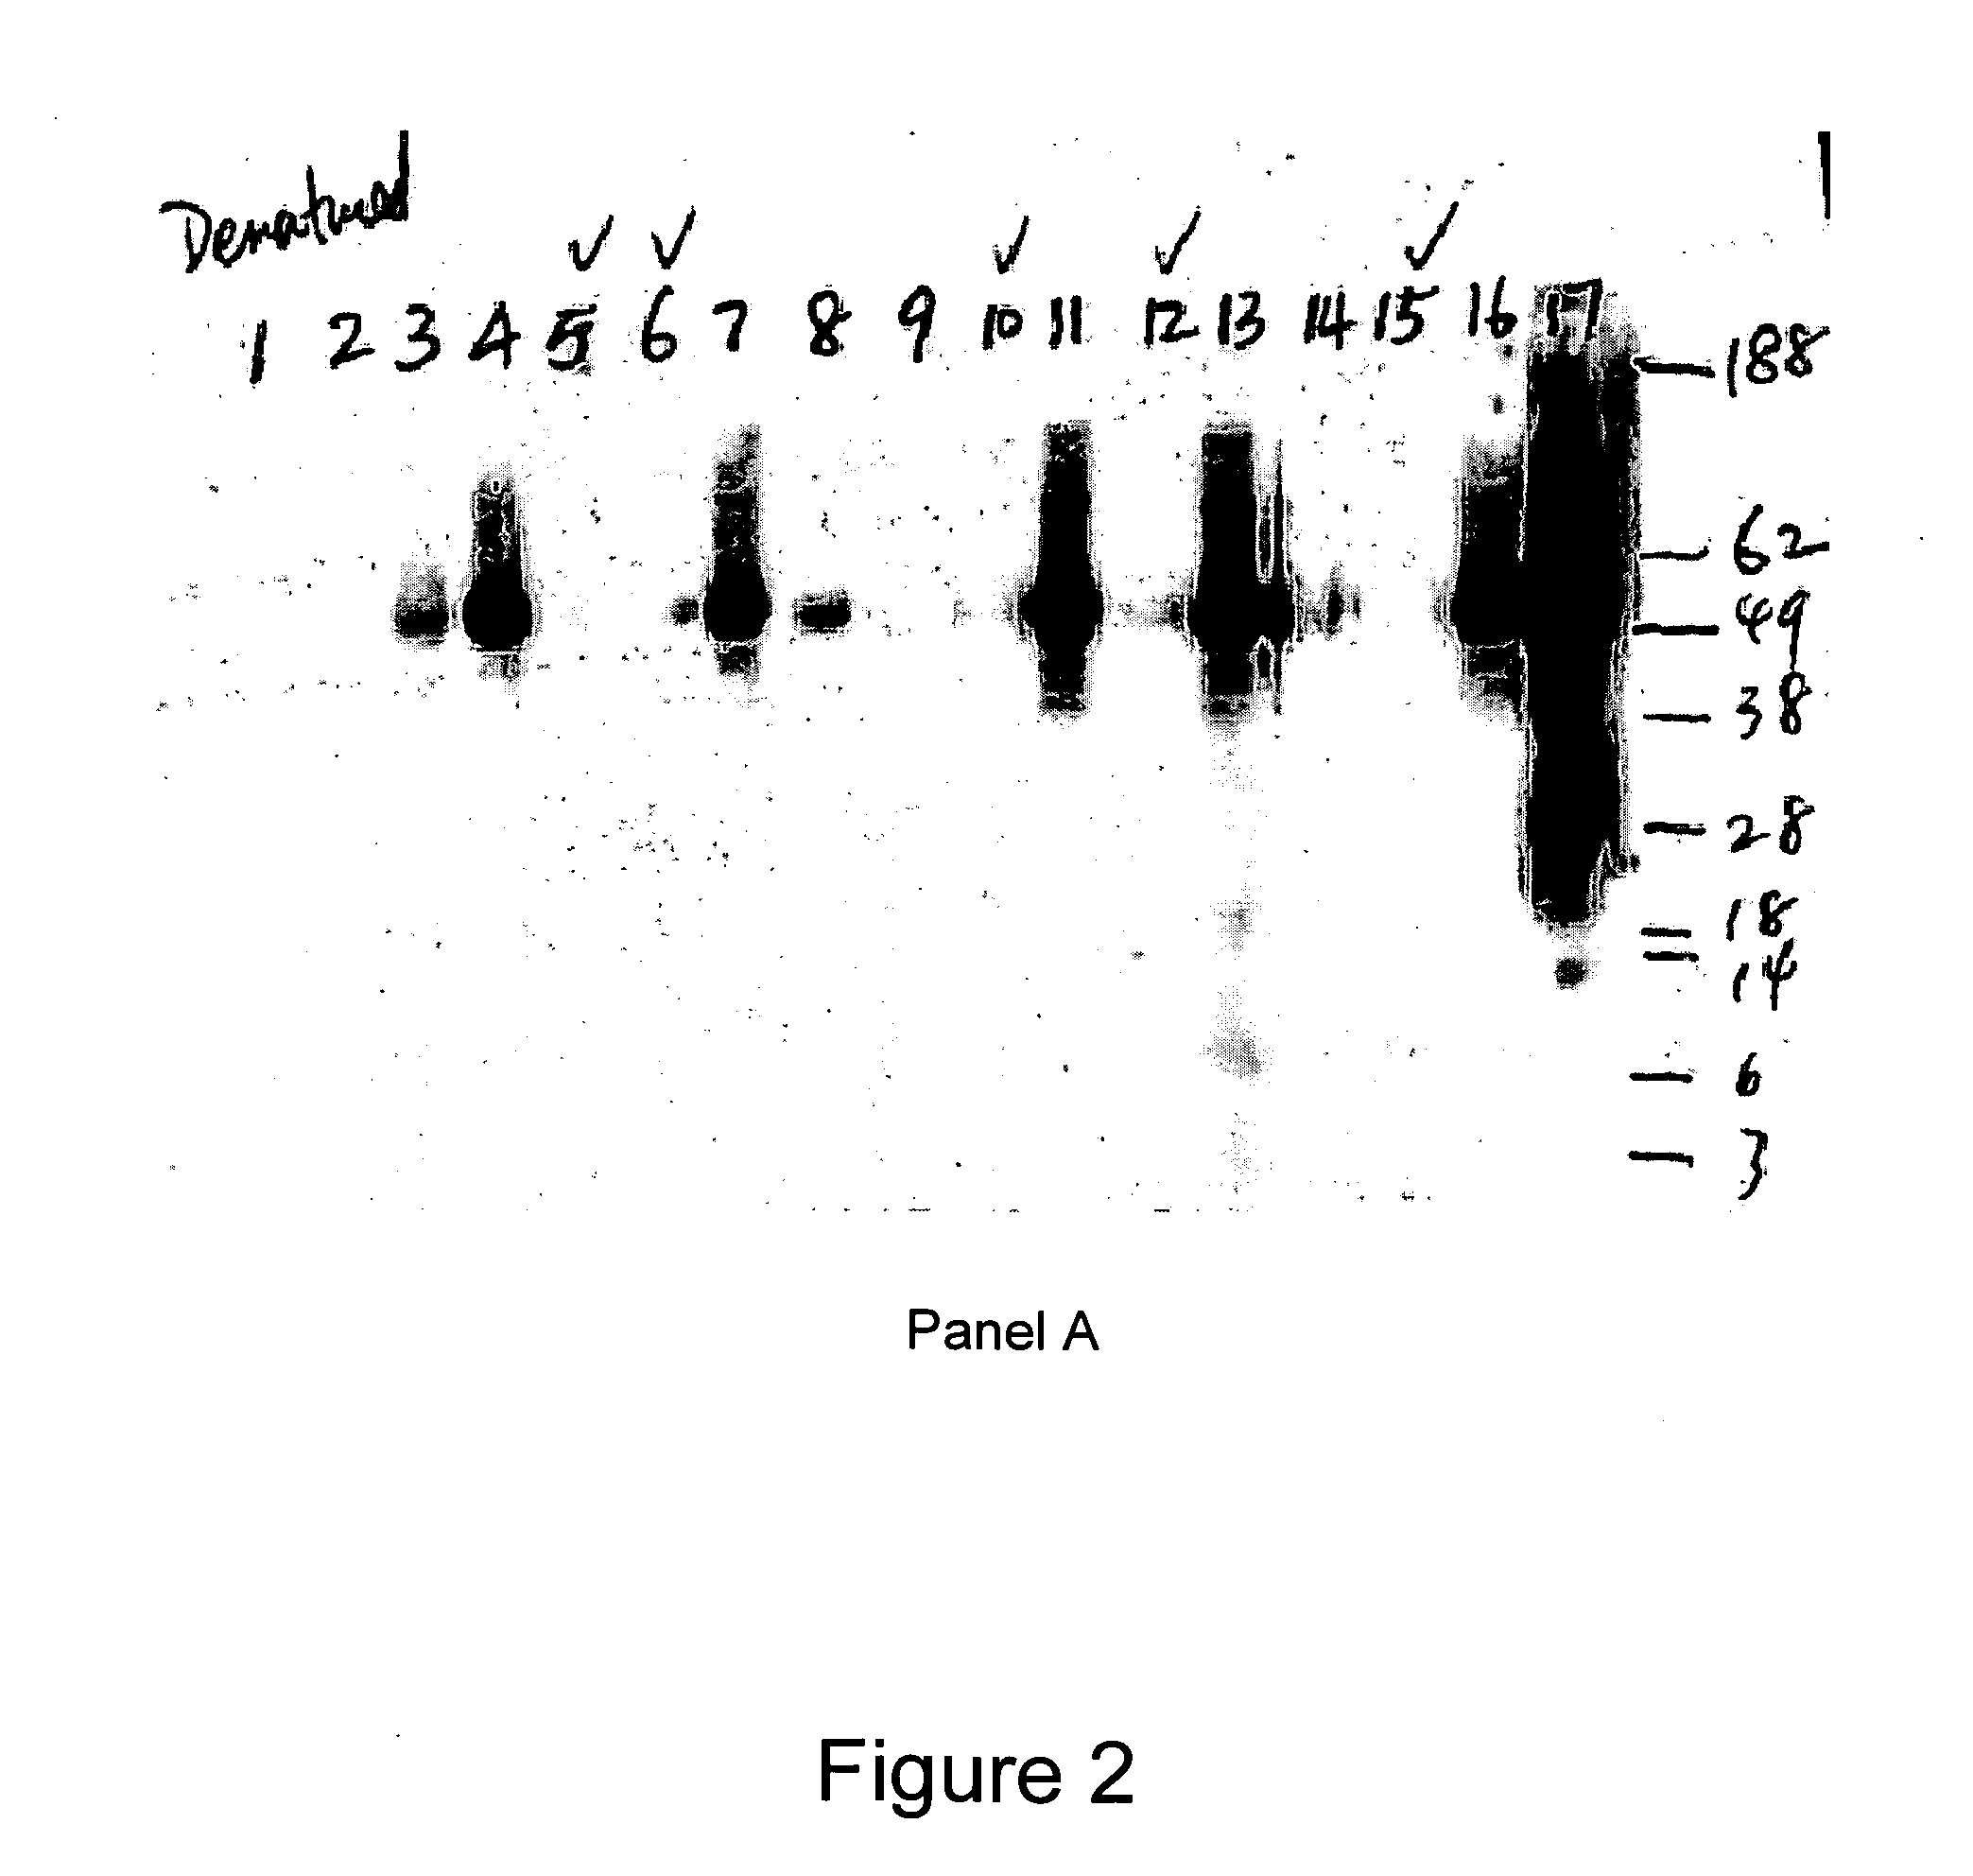 Native immunoglobulin binding reagents and methods for making and using same